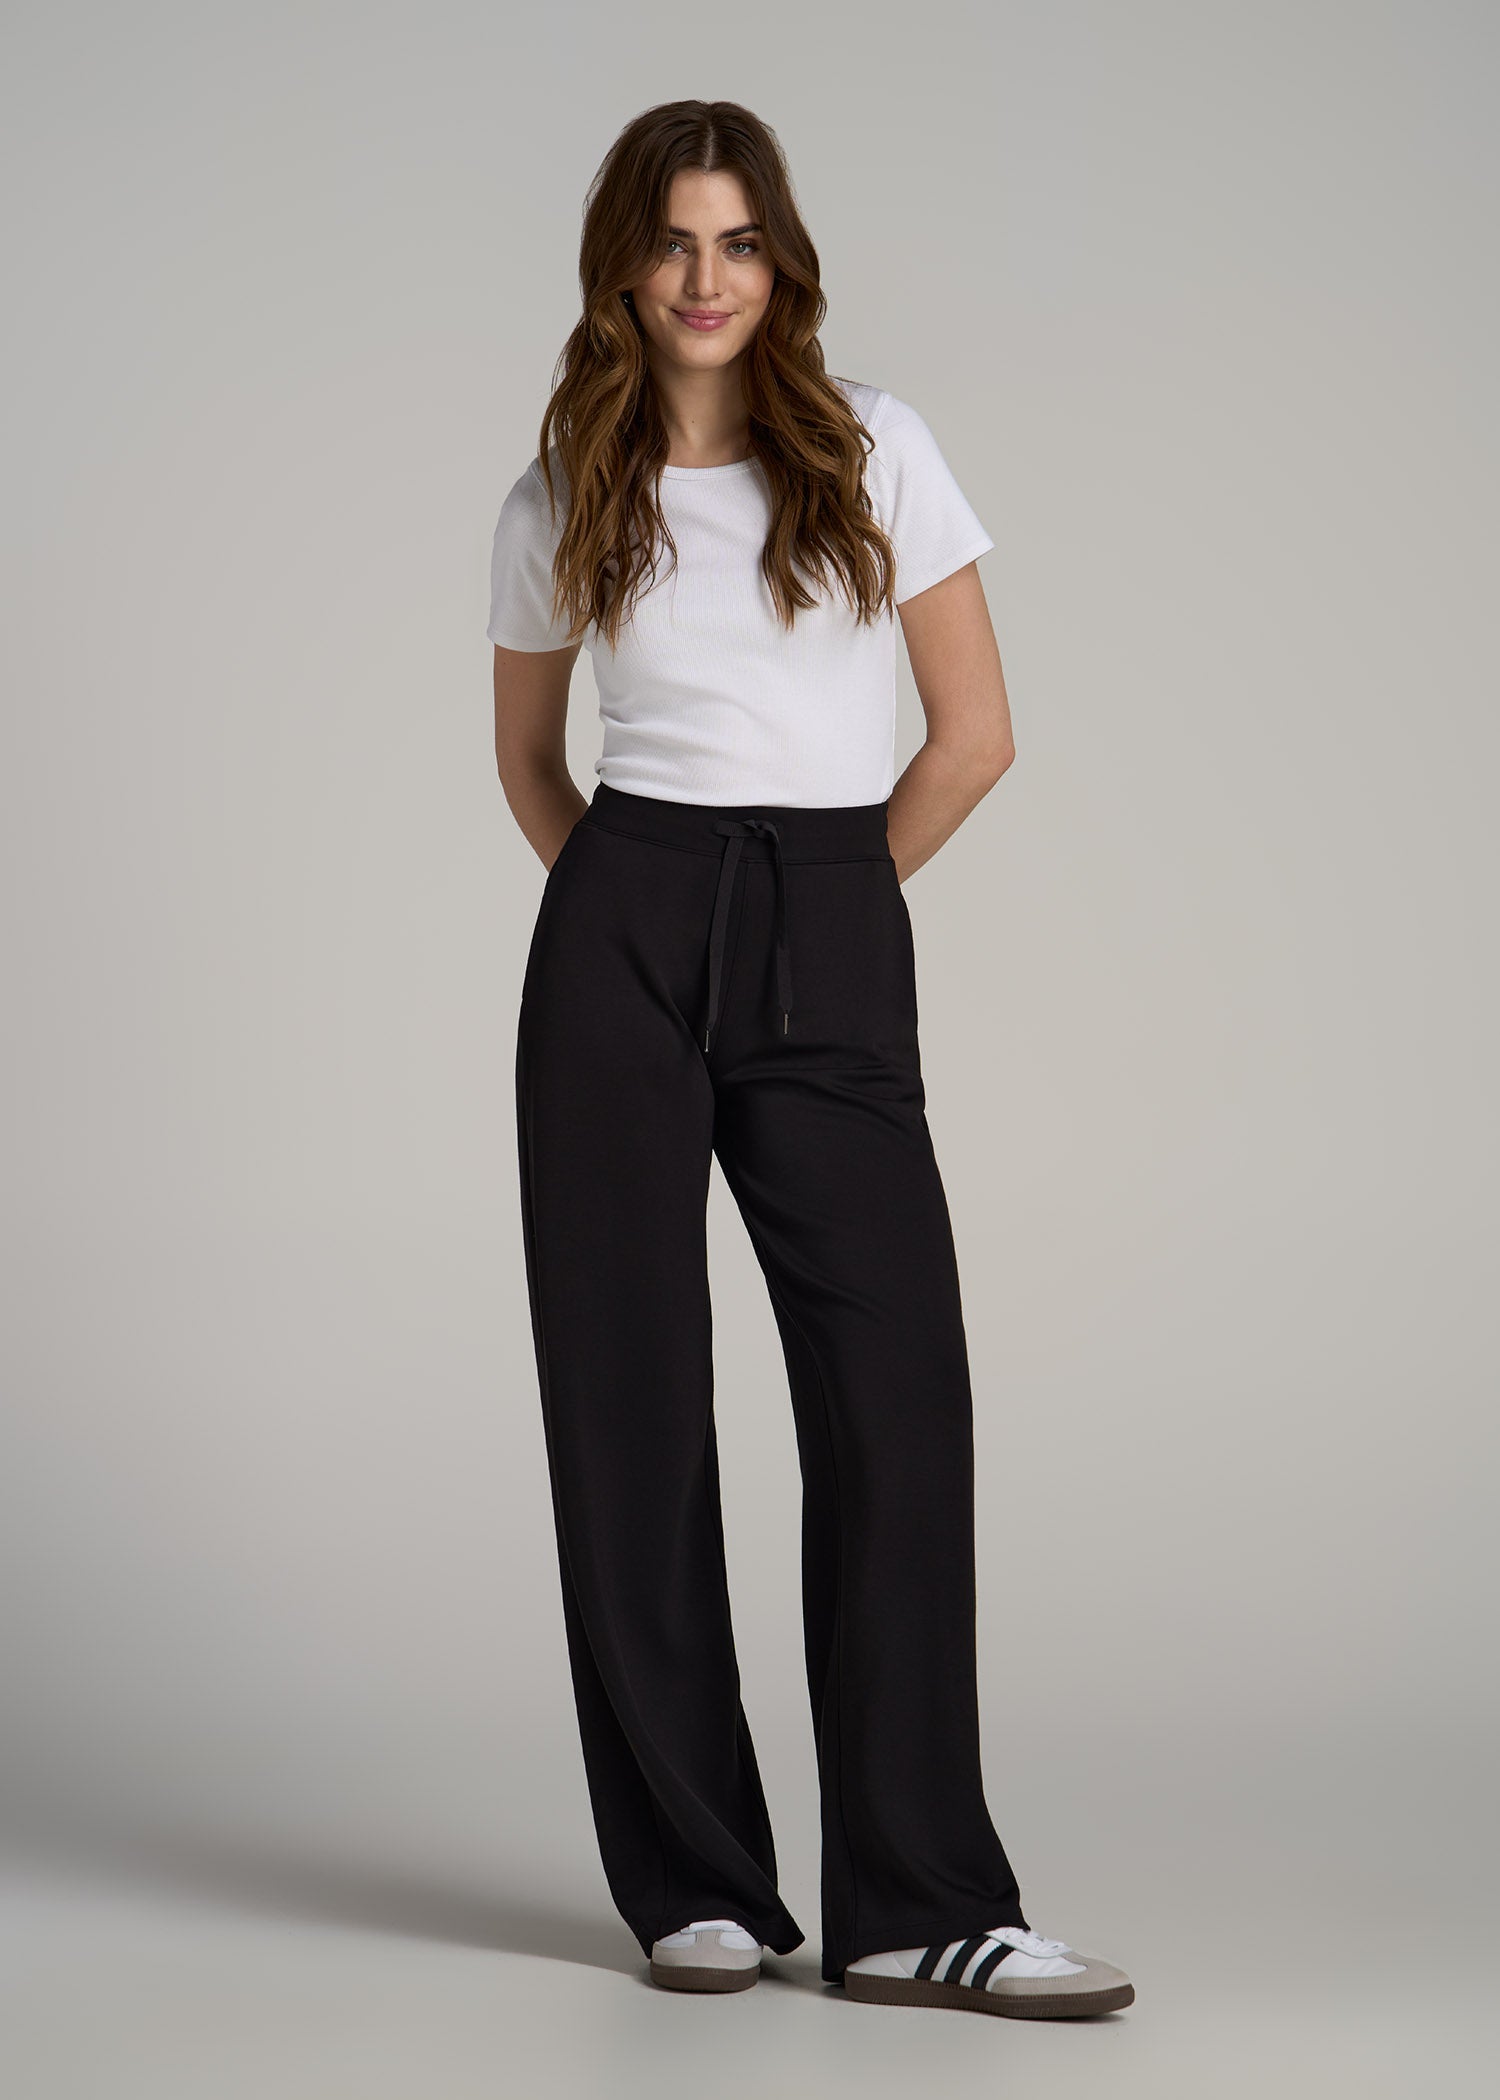 Pull-On Straight Leg Knit Pants for Tall Women